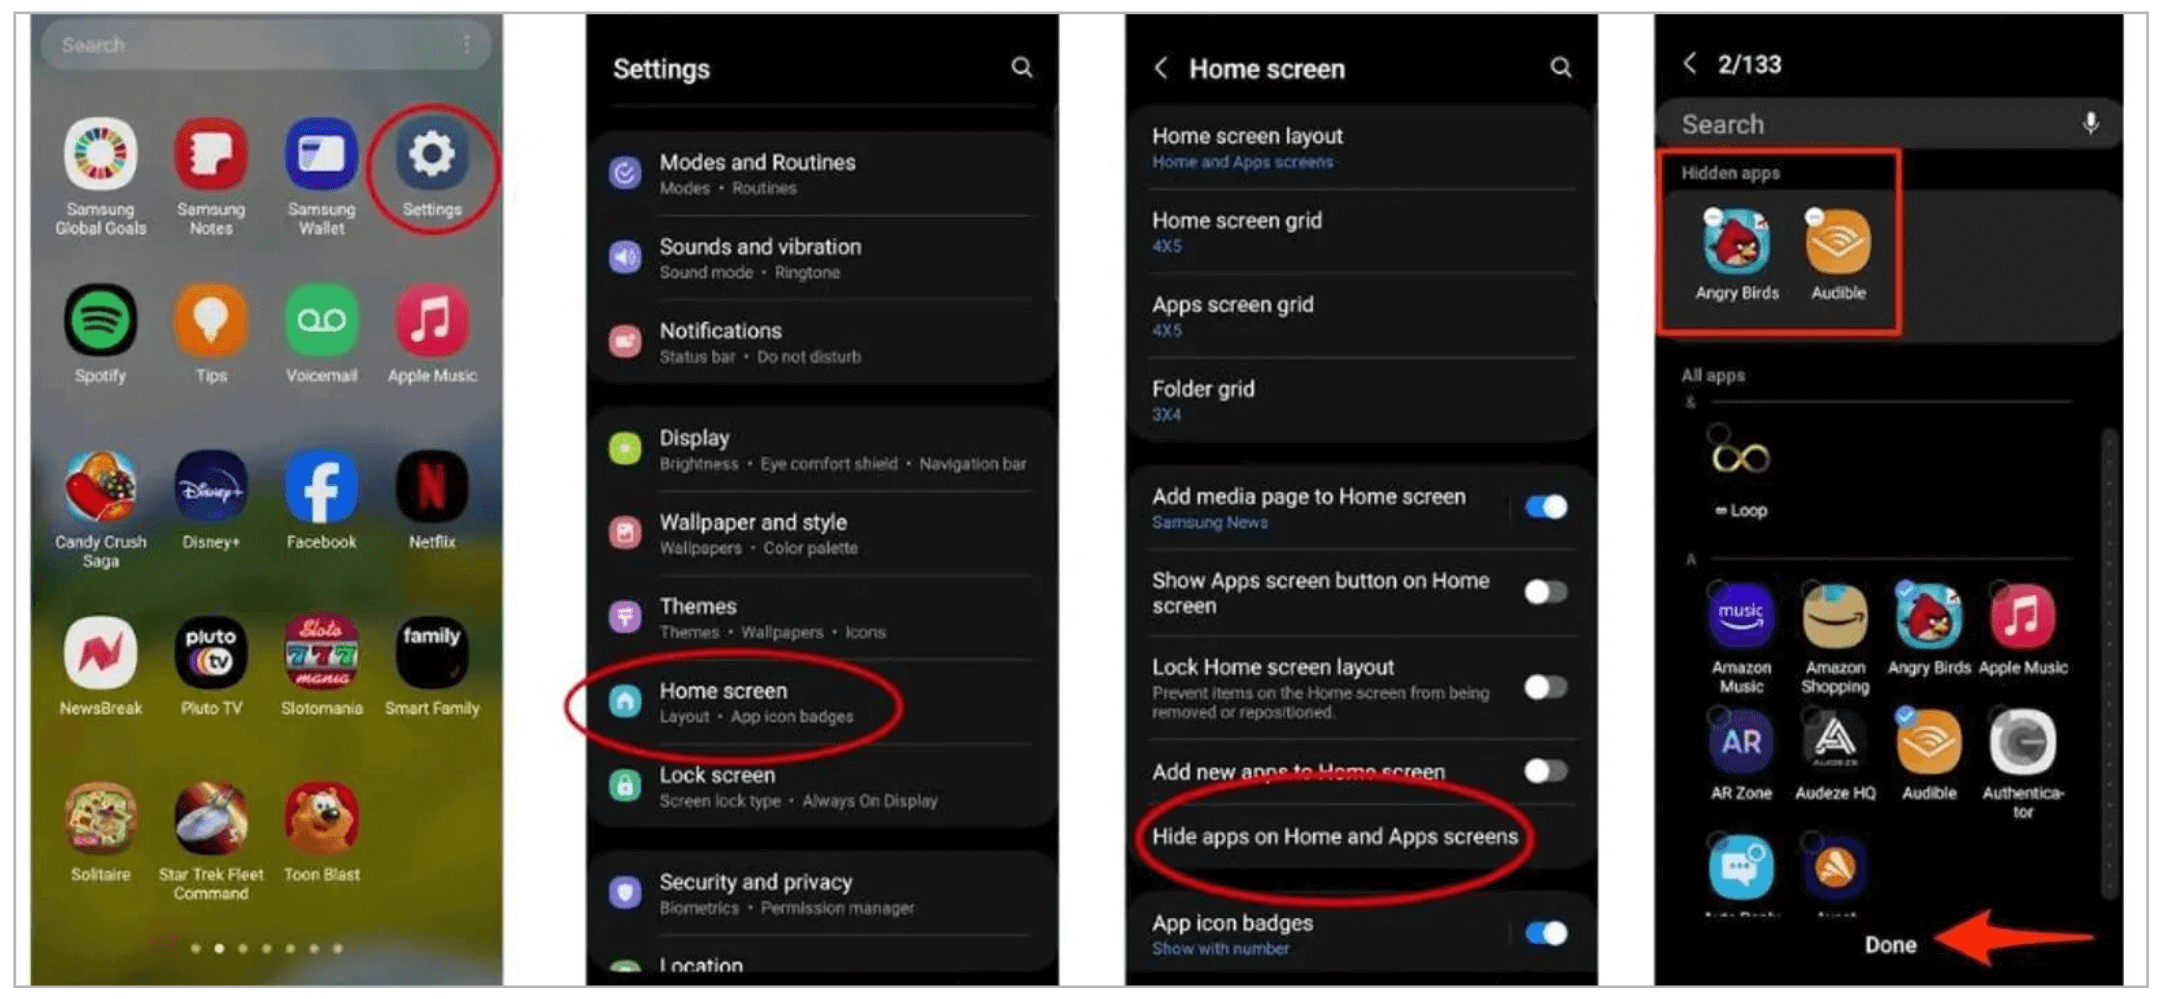 Use Built-in Settings to Hide Apps on Android